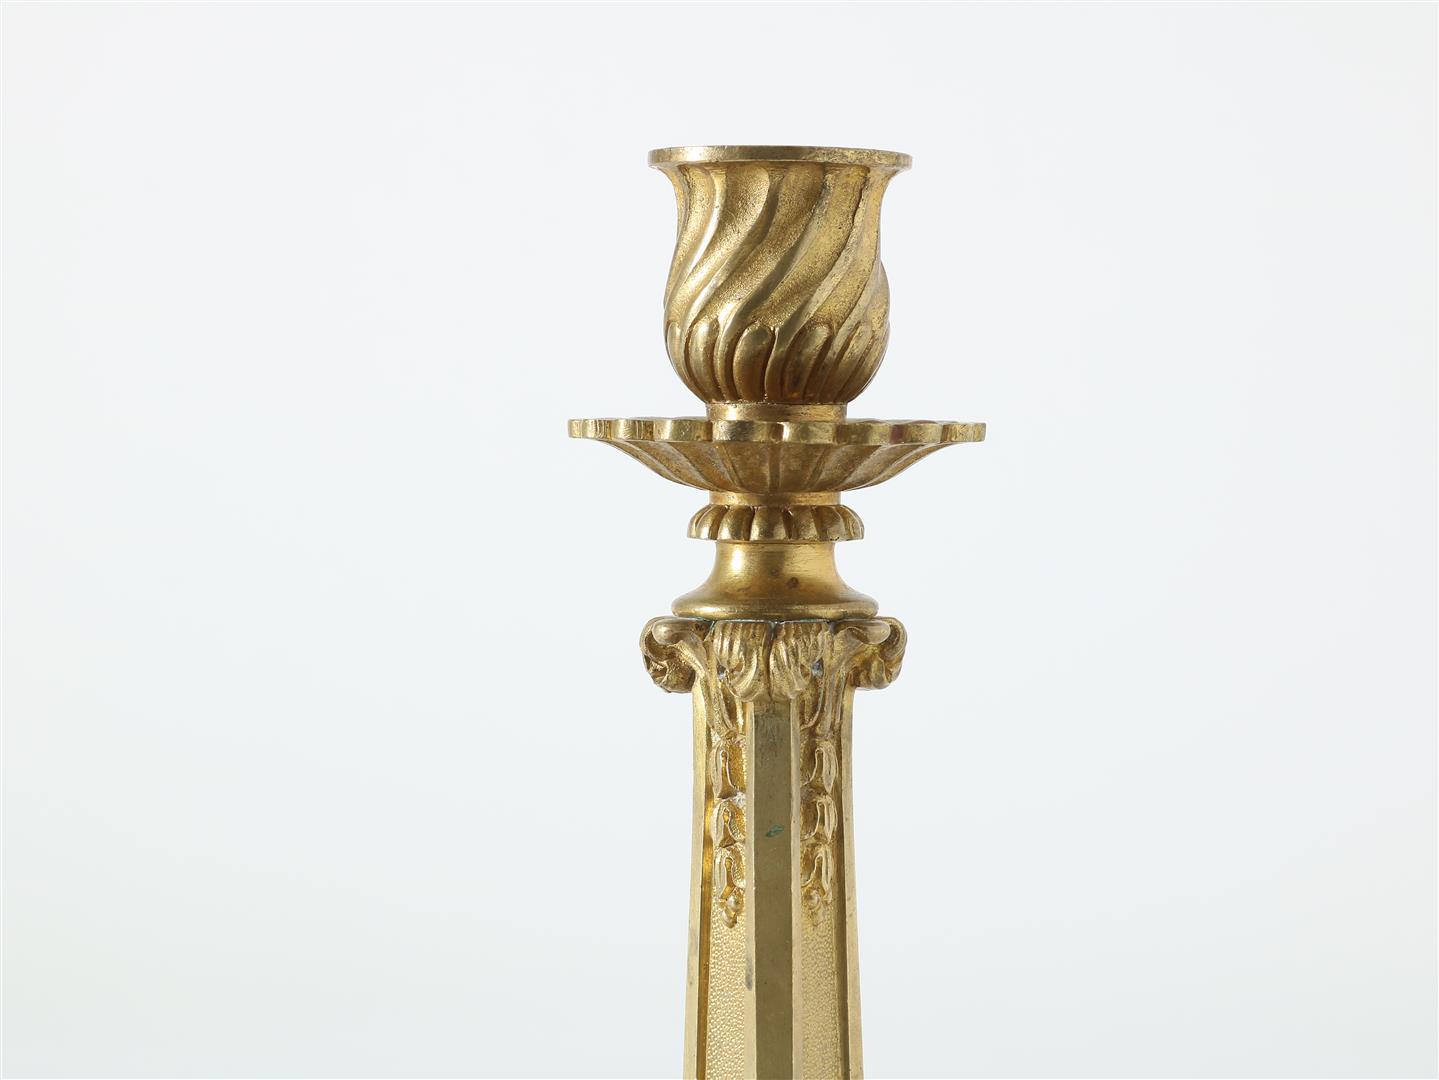 Set ormolu-gilded brass candlesticks, decorated with leaves and scallops, 19th century, height 29 - Image 2 of 4